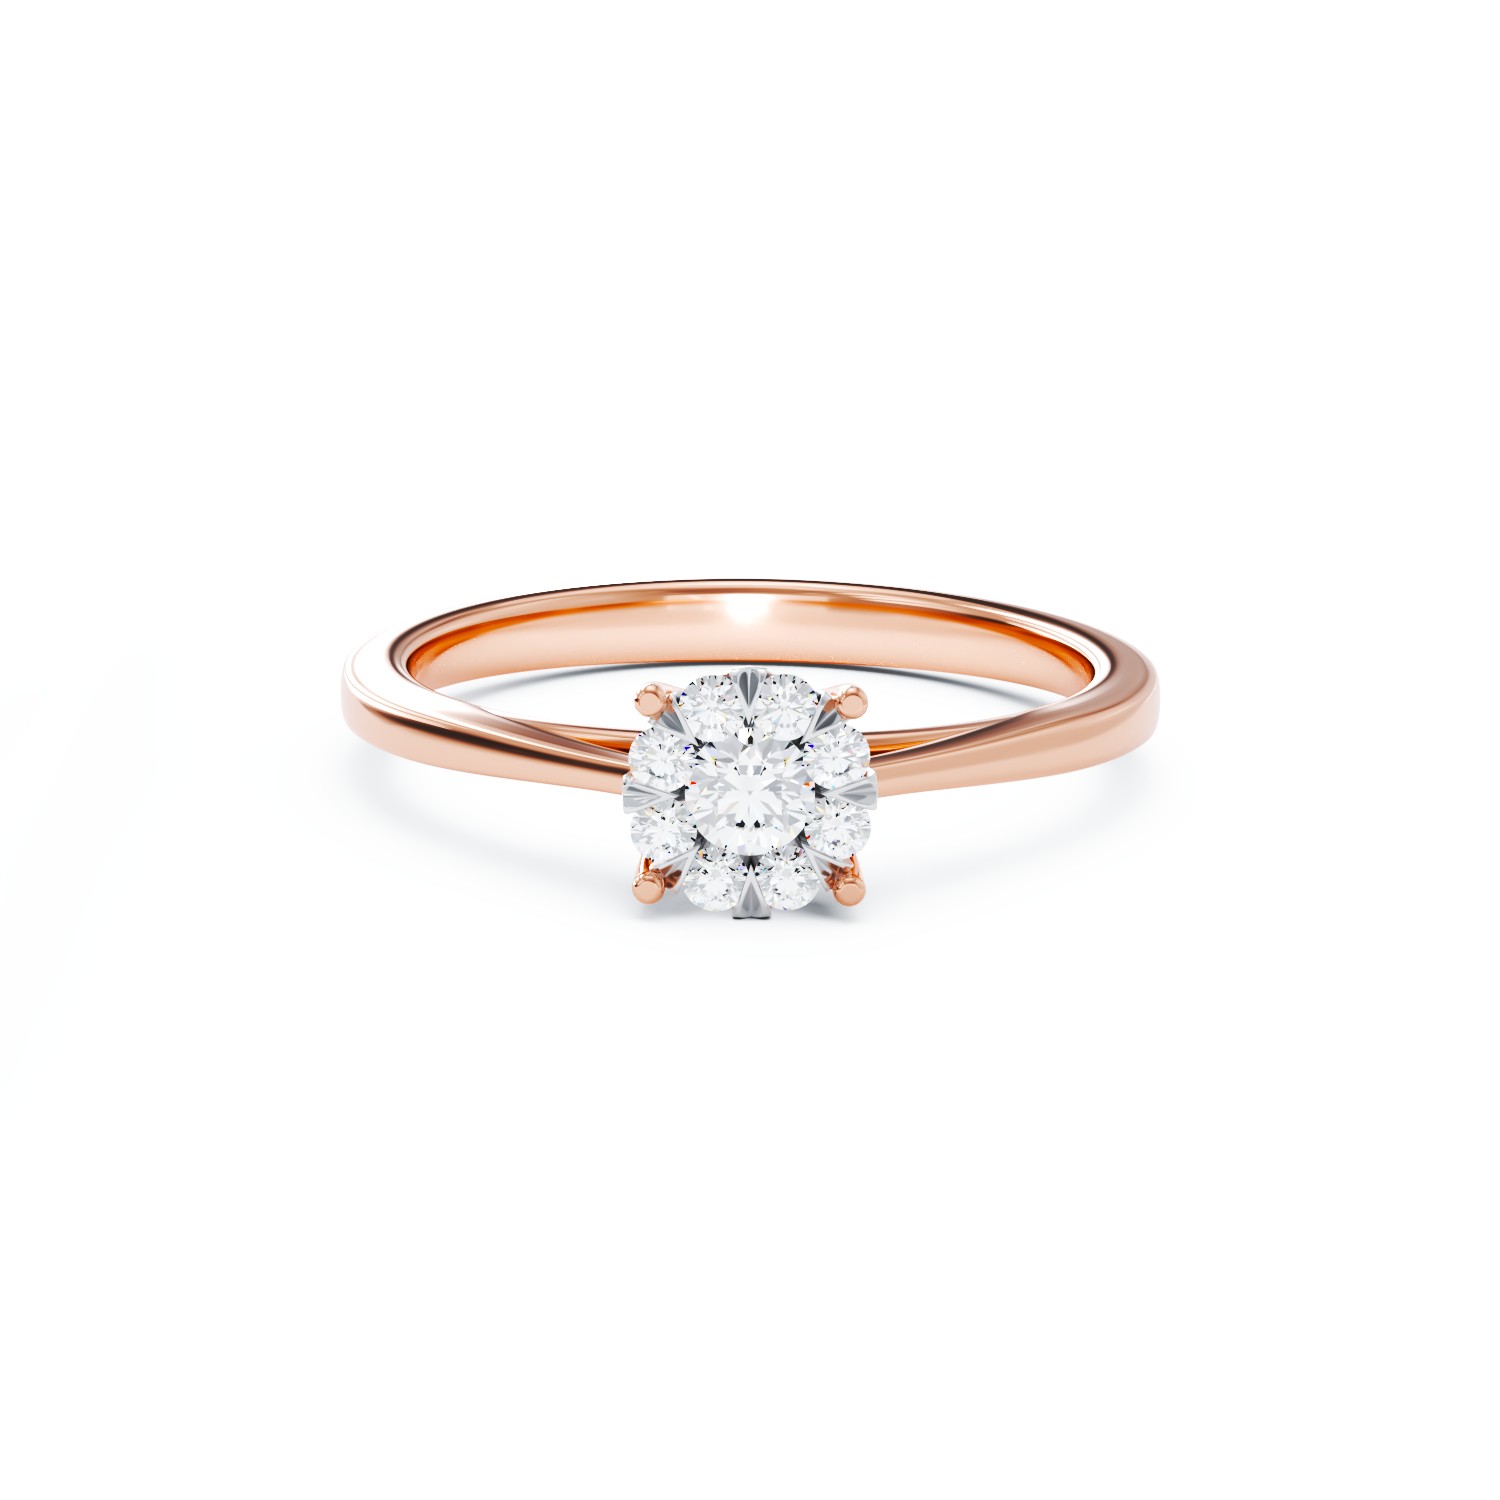 Rose gold engagement ring with 0.15ct diamonds